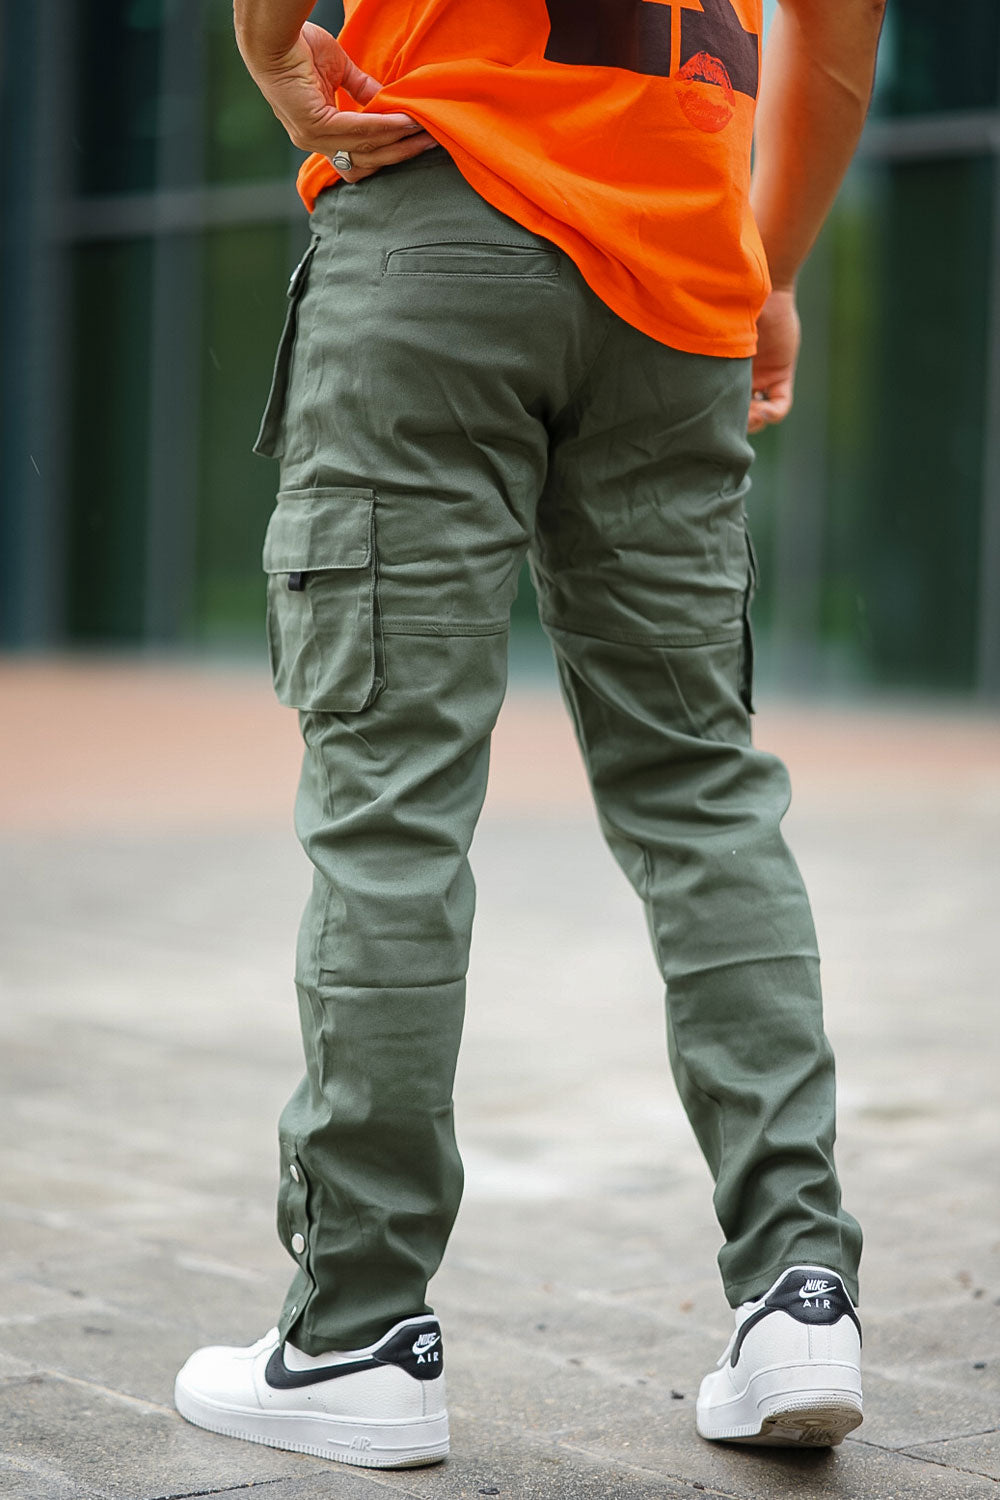 army green cargo pants